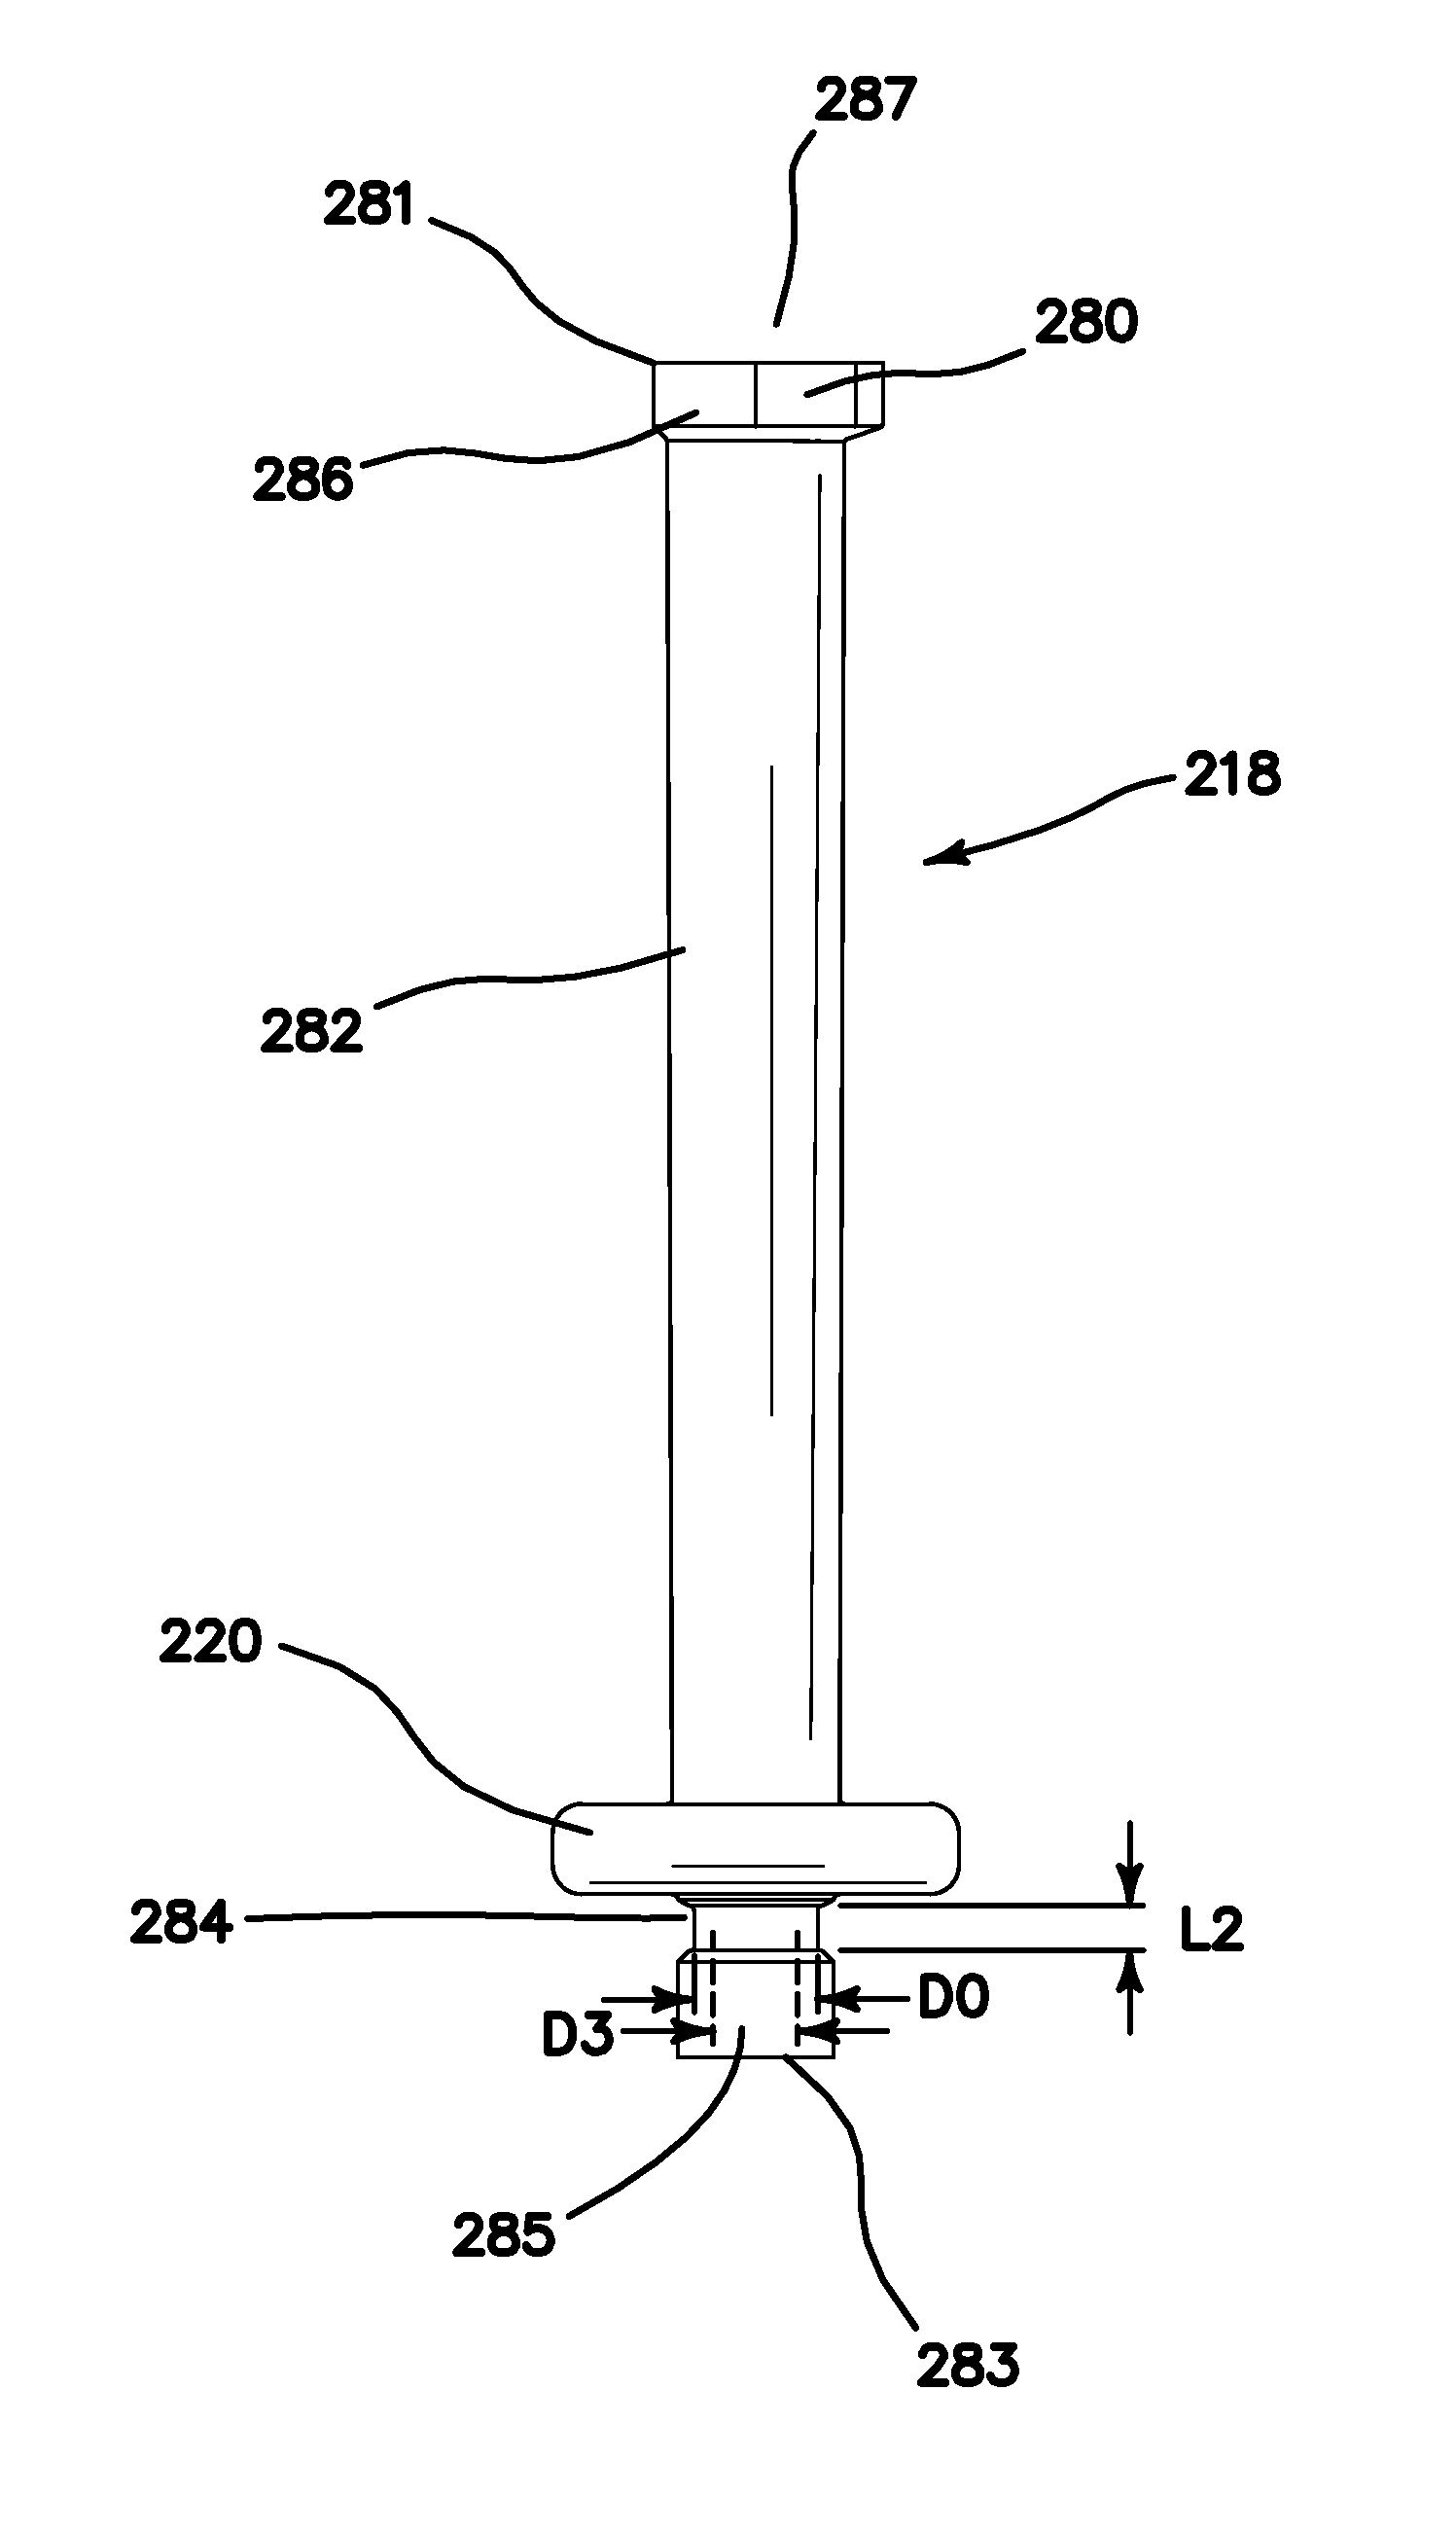 Trocar cannula assembly and method of manufacture